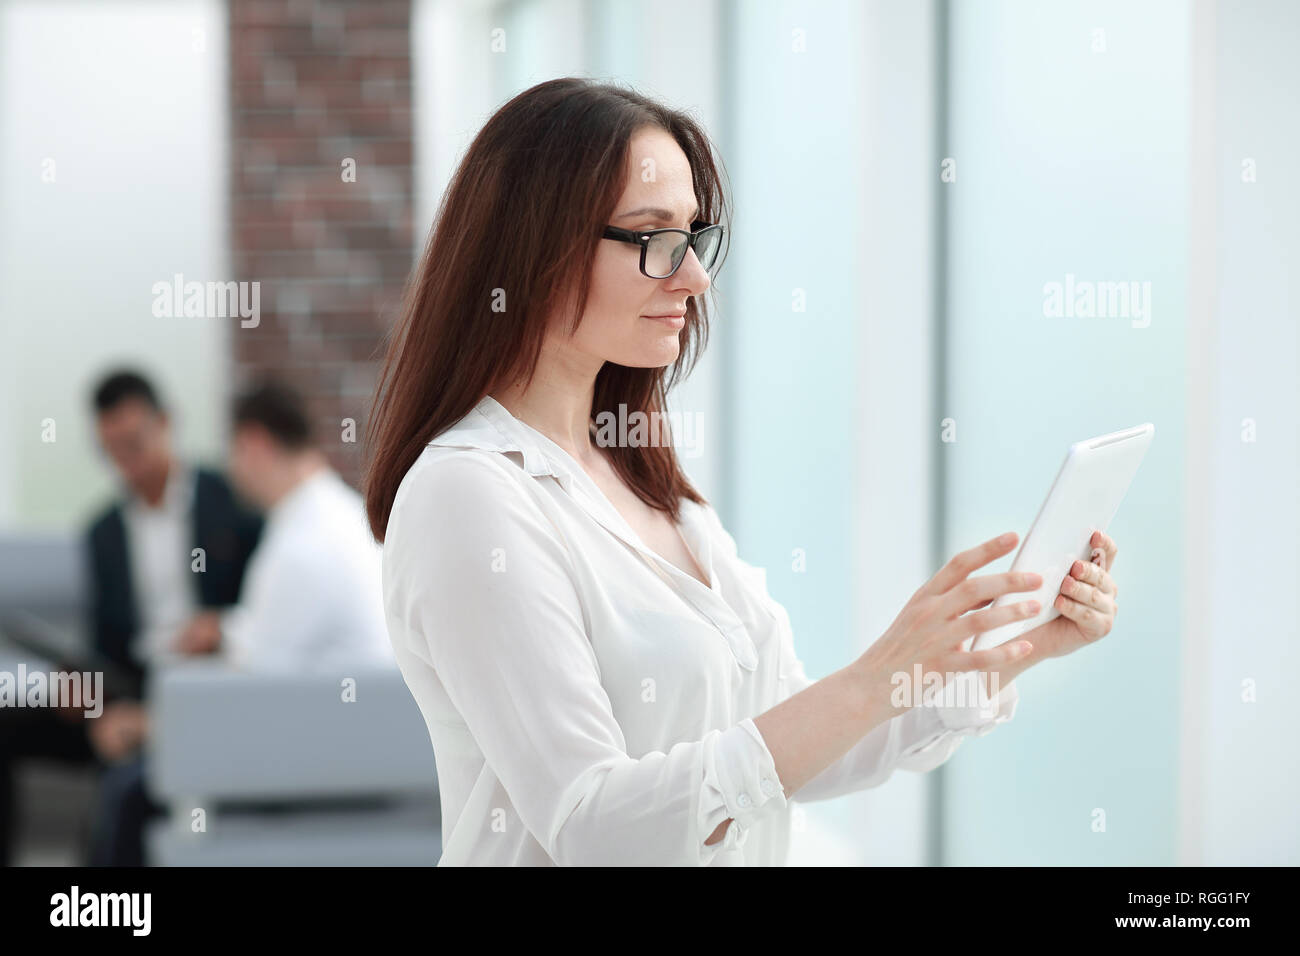 modern businesswoman reading a message on a digital tablet Stock Photo